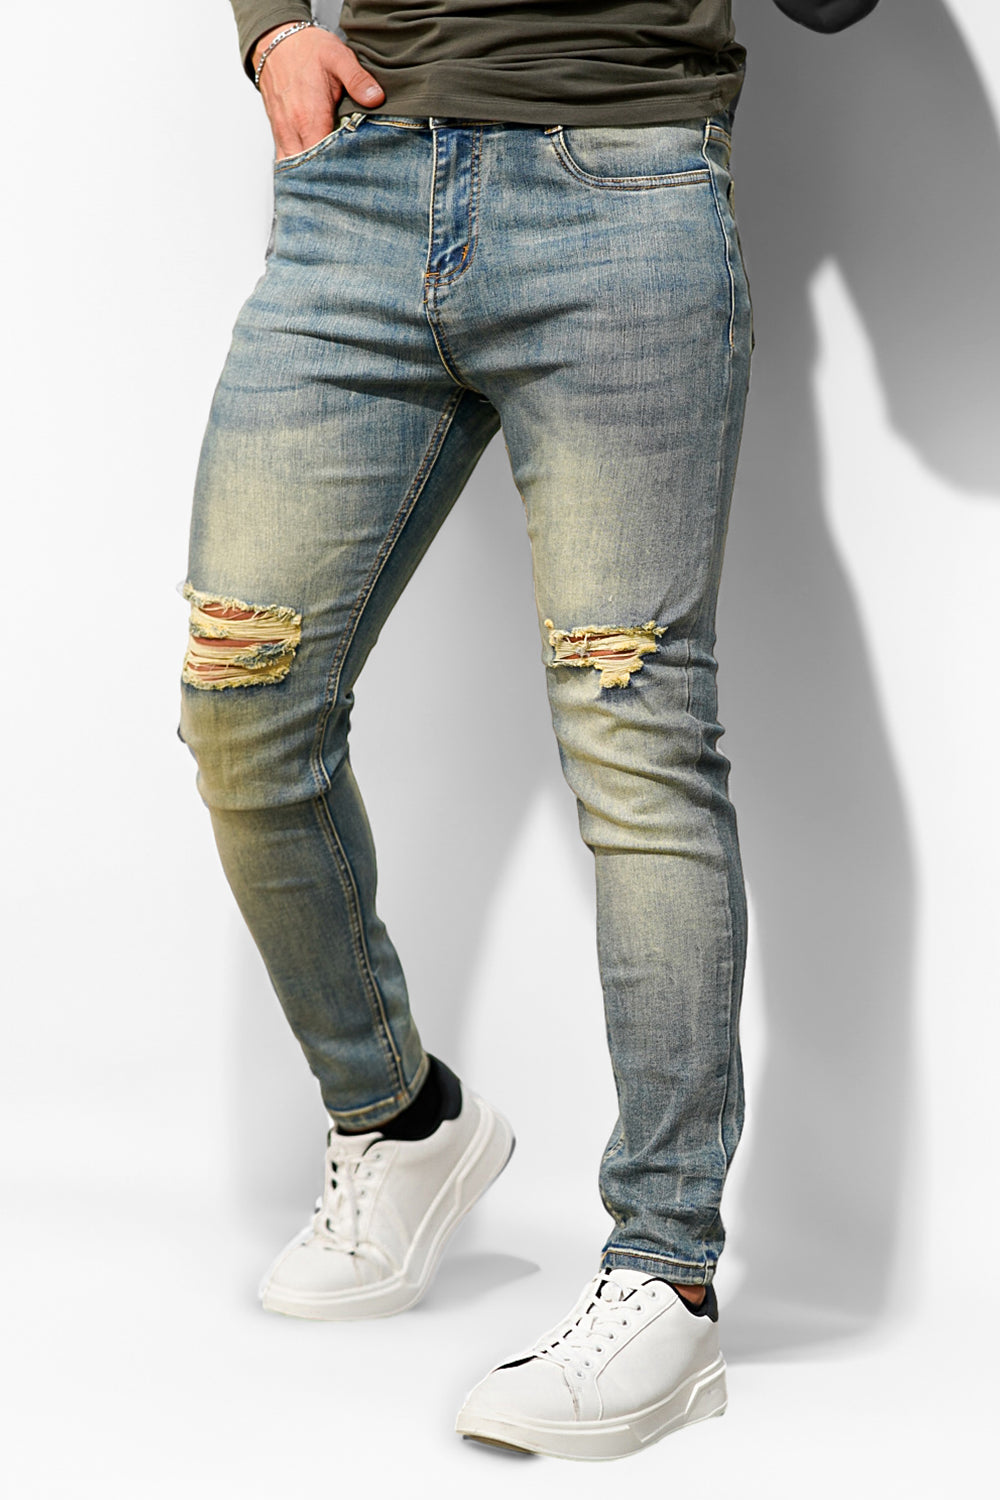 gingtto mens blue skinny jeans ripped - washing